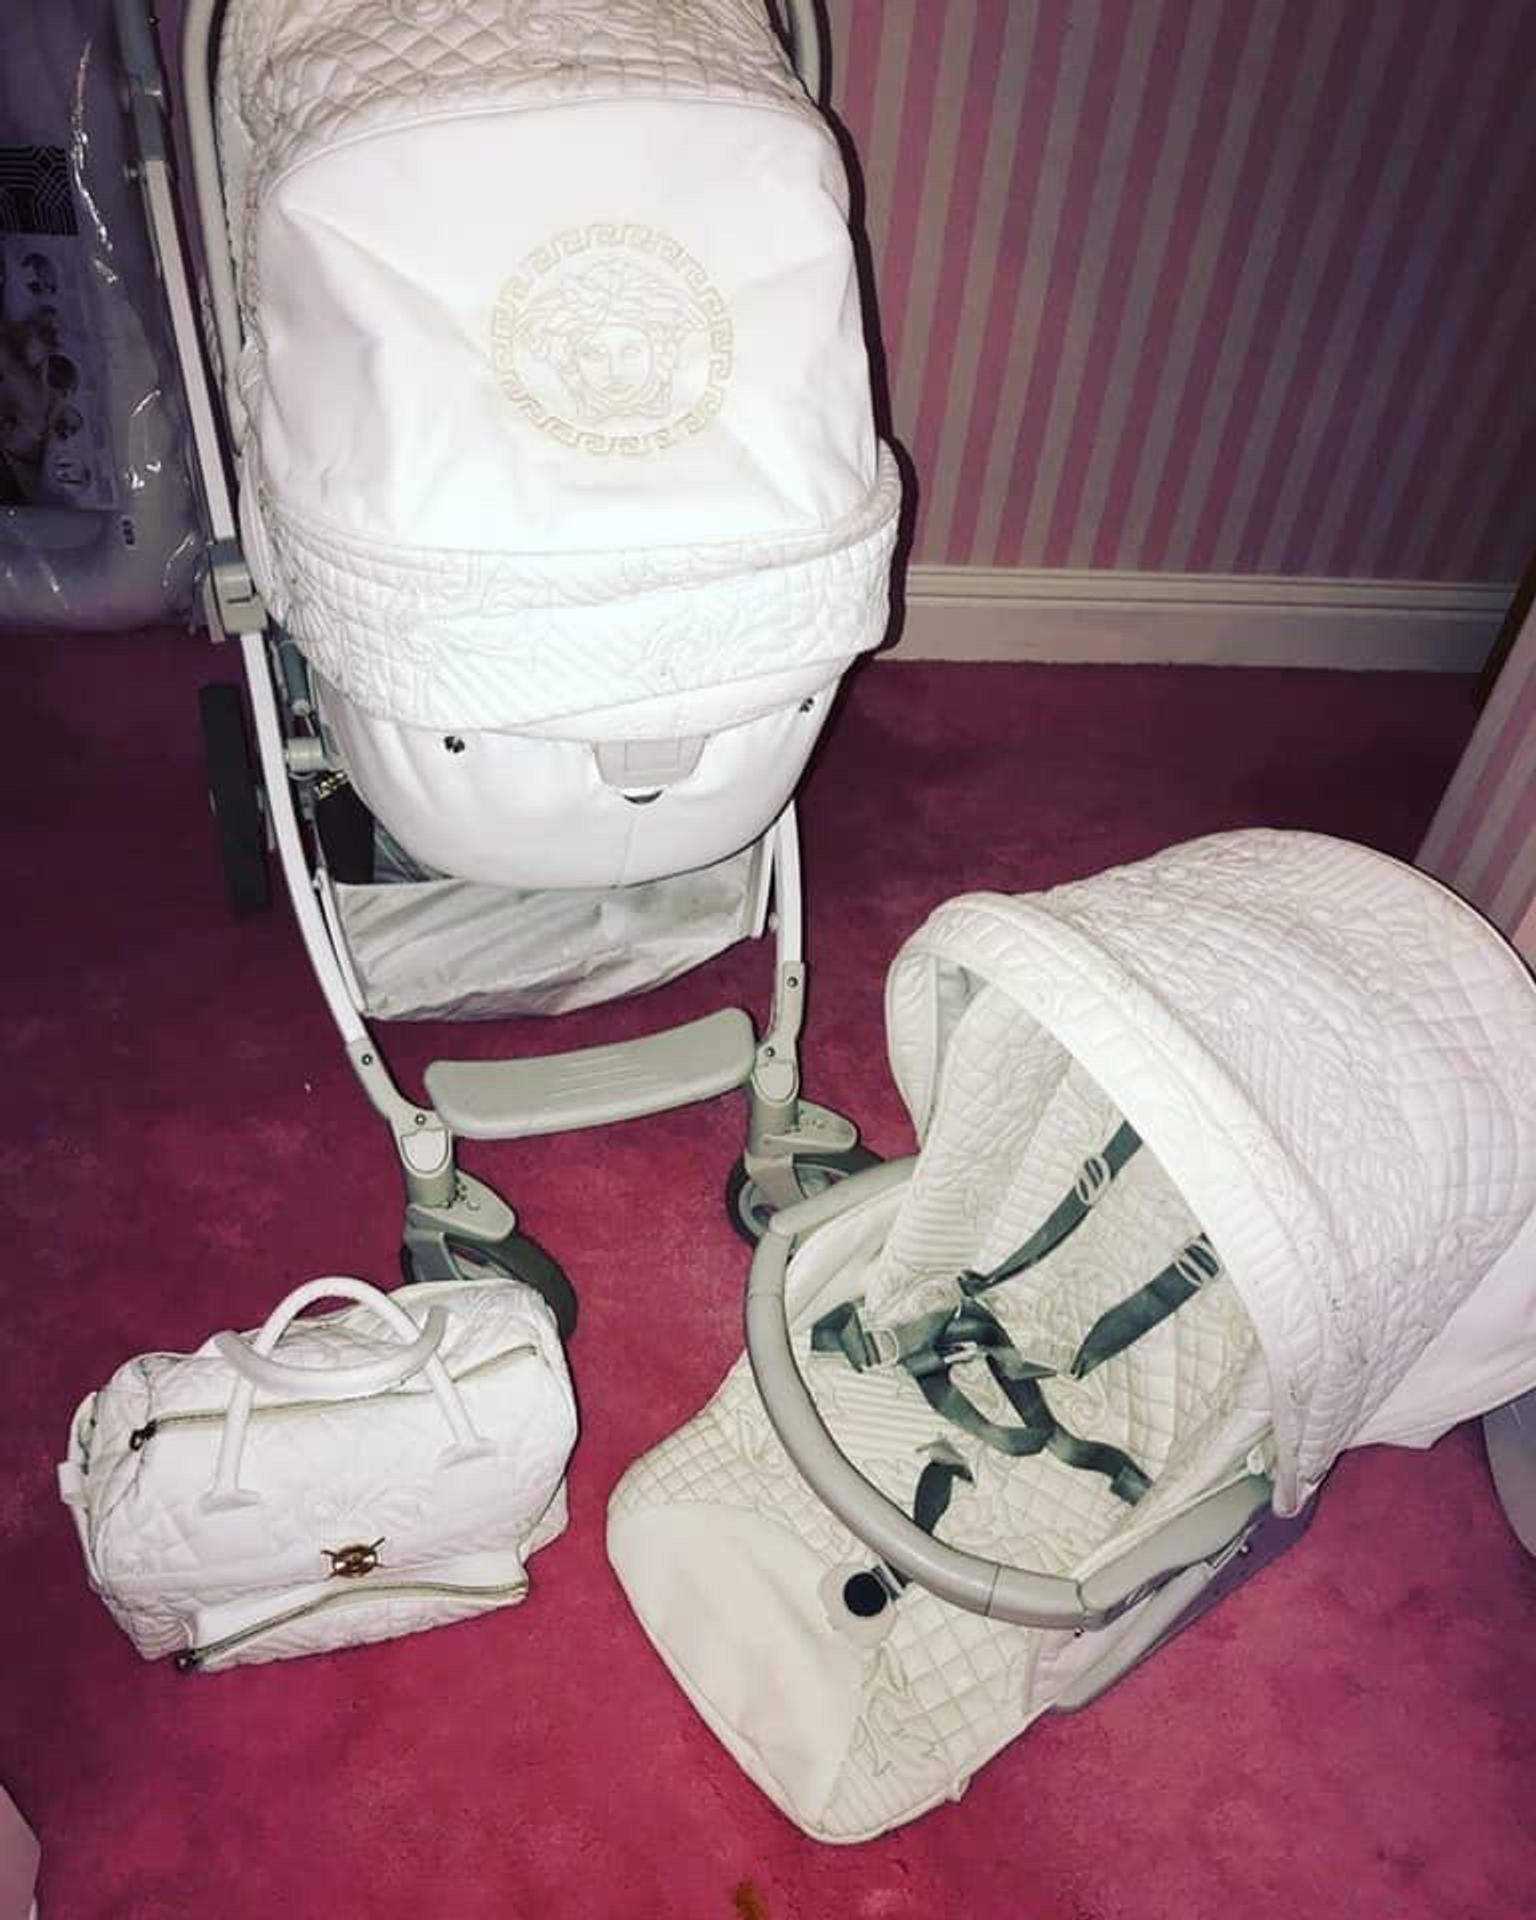 young versace stroller white